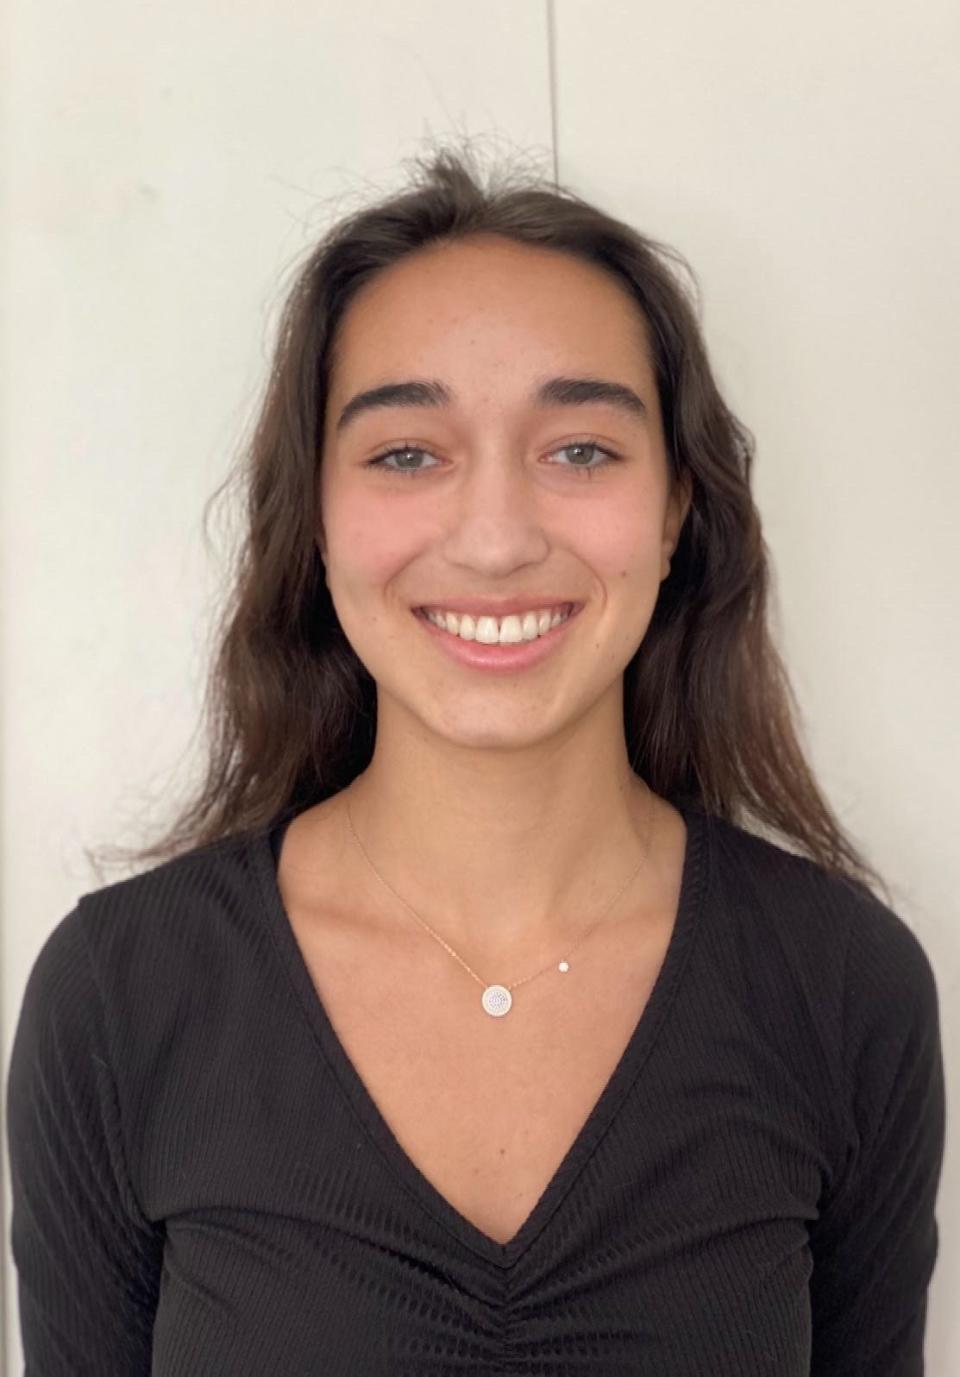 Recent Asheville High graduate, Sophia Nash, receives $40,000 scholarship from the Community Foundation of Western North Carolina to attend North Carolina State.